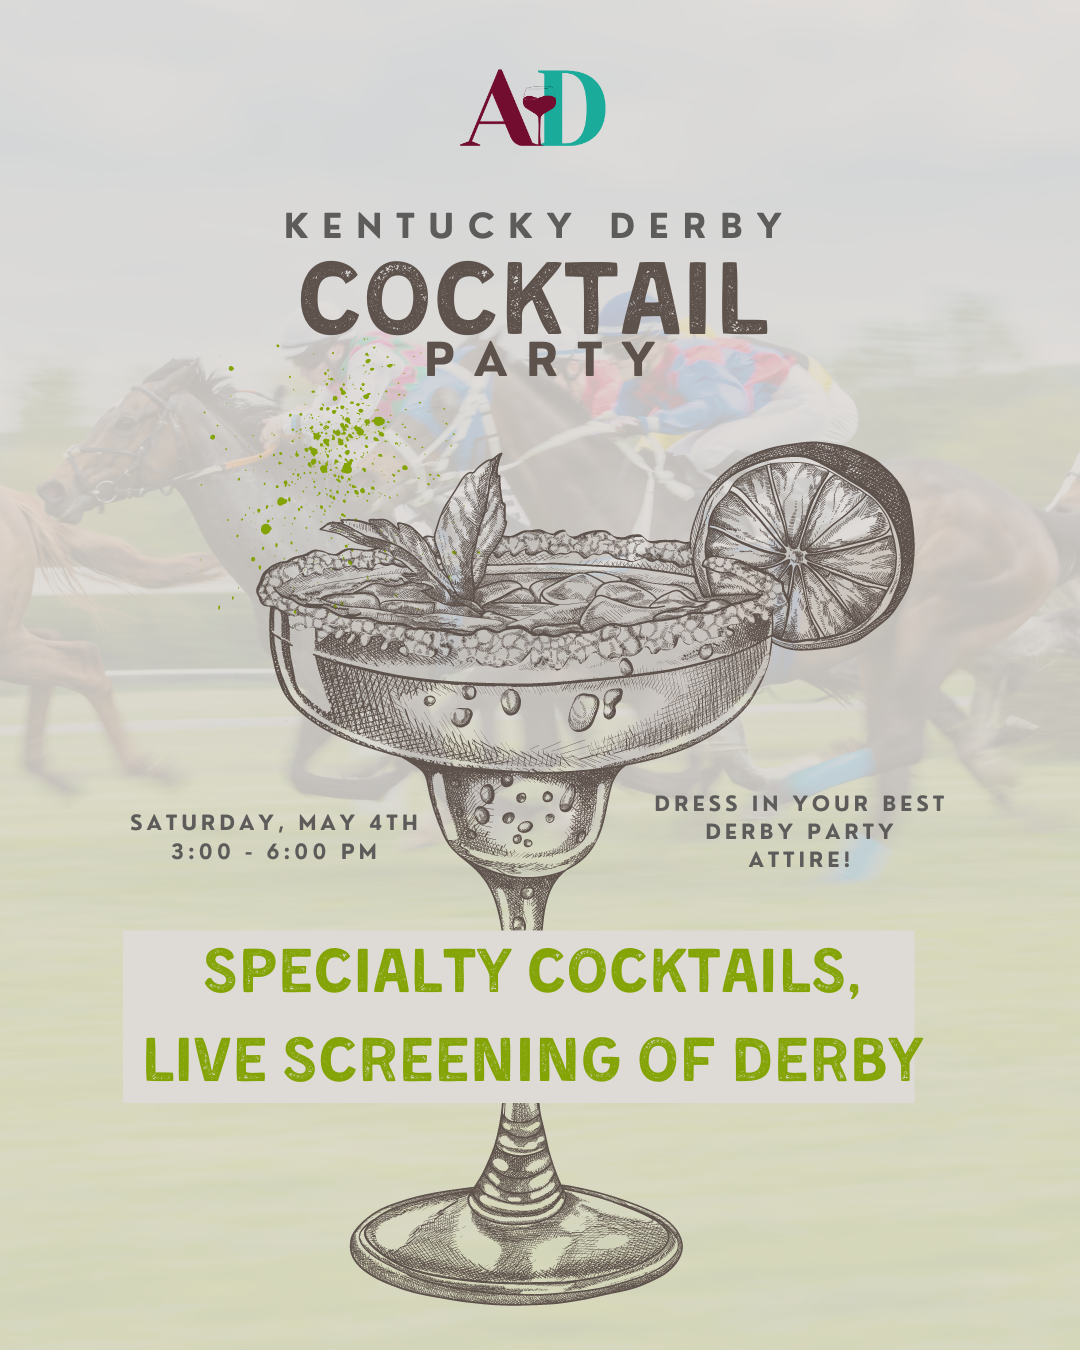 Sat, May 4th: Kentucky Derby Cocktail Party